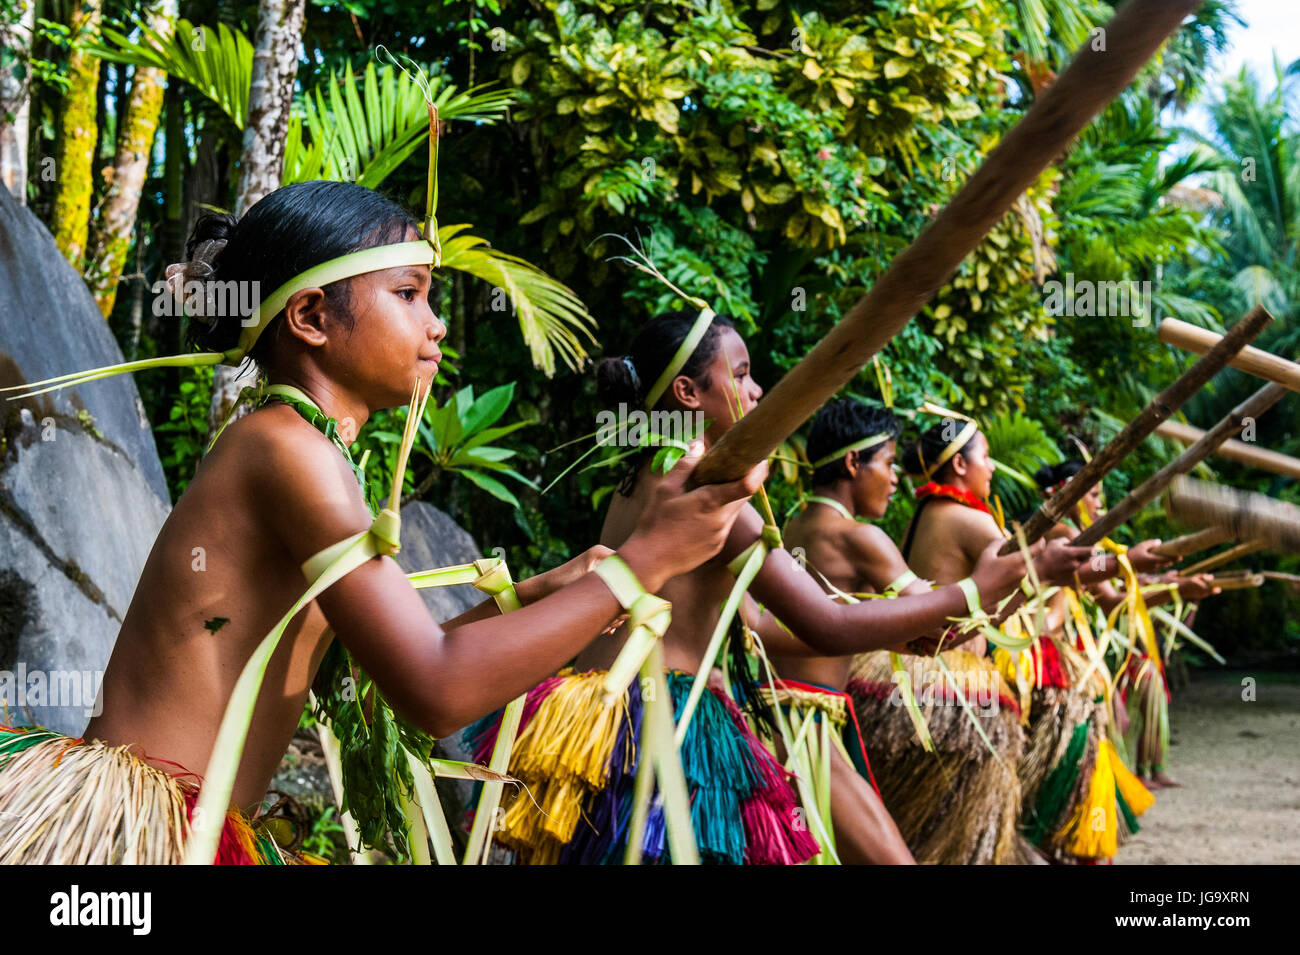 Stick dance from the tribal people of the island of Yap, Micronesia Stock Photo